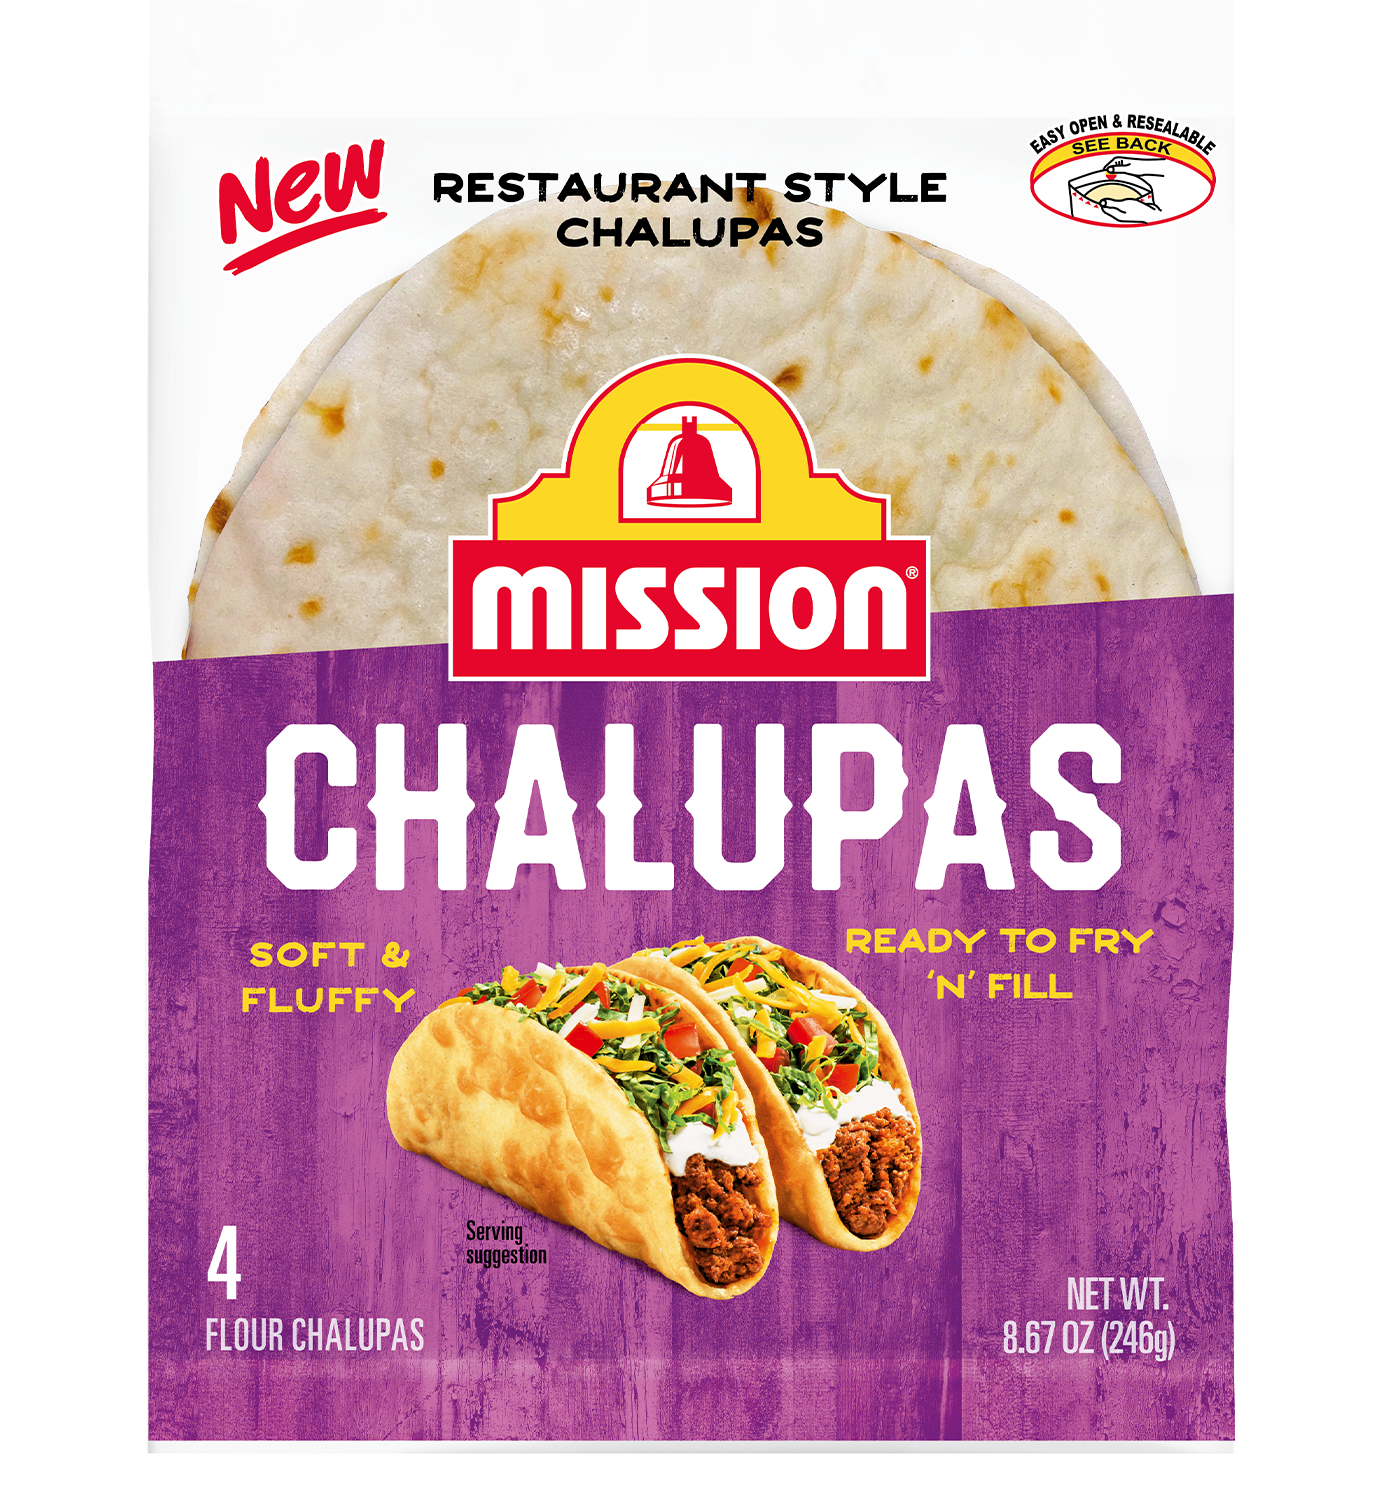 chalupas product packaging